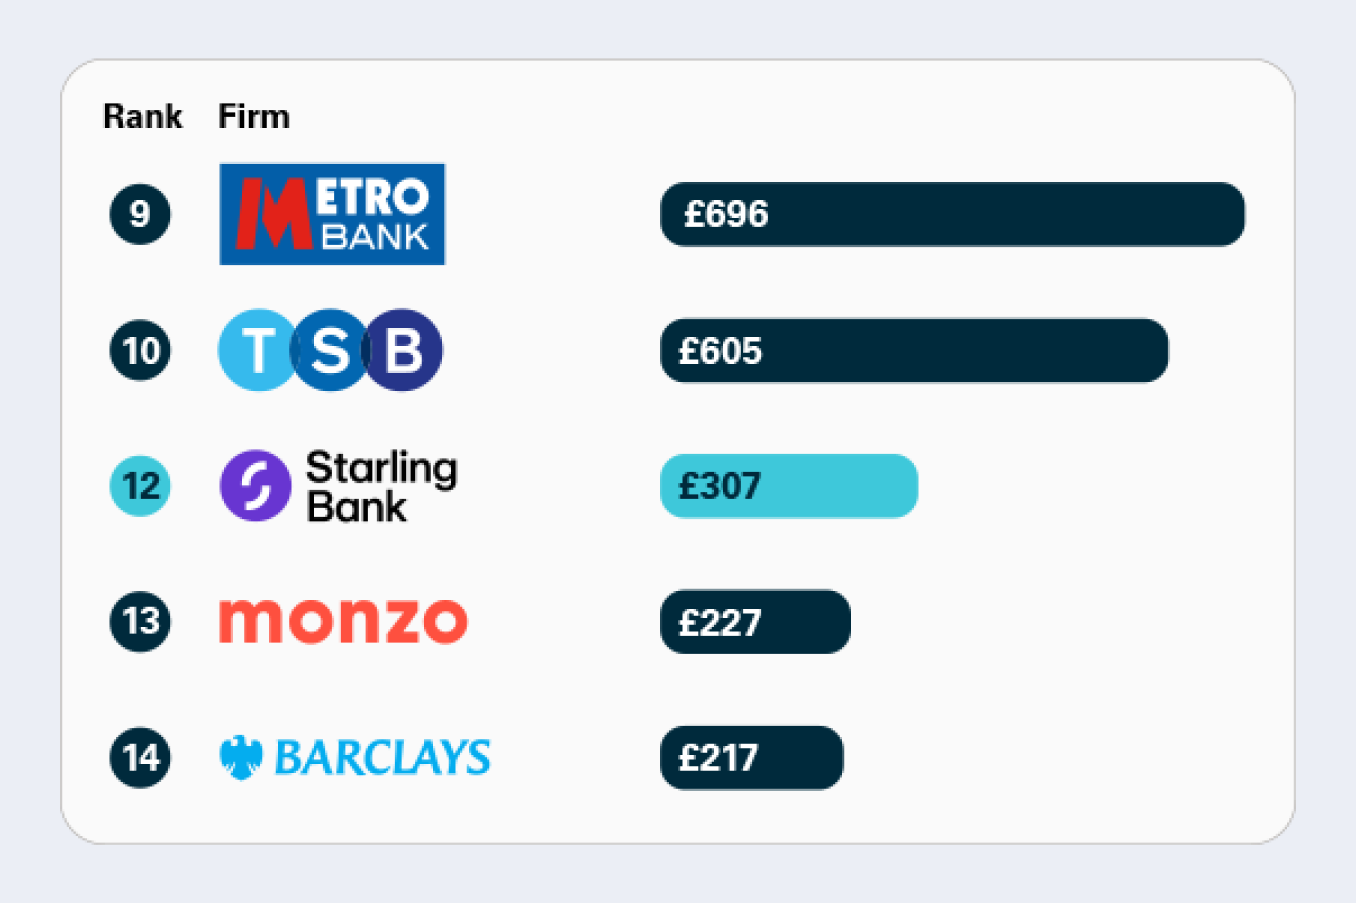 This data shows the amount of APP fraud received per million pounds of transactions, ranked out of 20 firms. Lower figure is better. 9. MetroBank = £696, 10. TSB = £605, 12. Starling Bank = £307, 13.Monzo = £227, 14. Barclays = £217